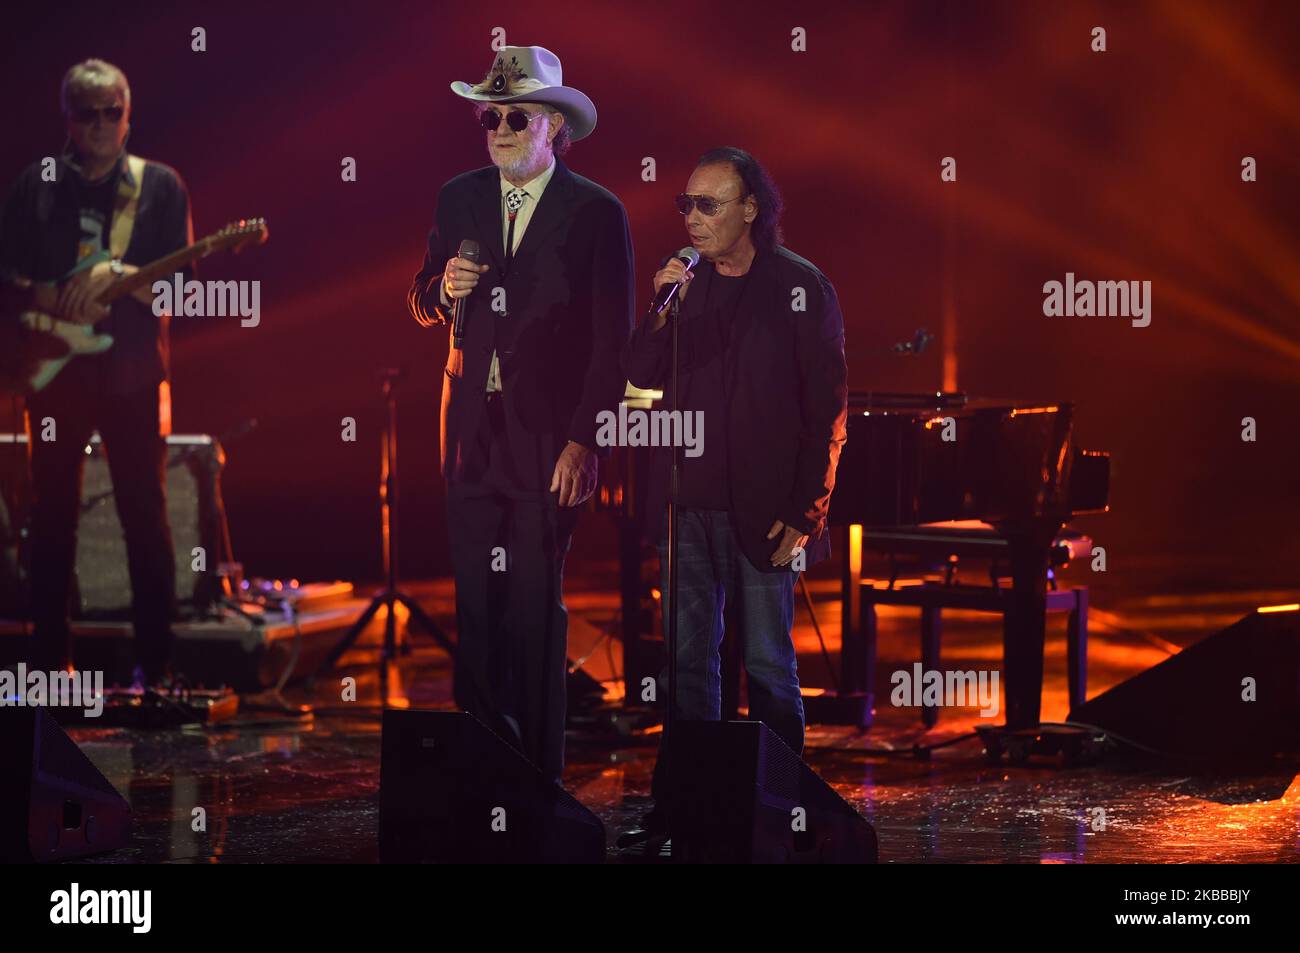 Italian singers Francesco De Gregori and Antonello Venditti sing during 6th stage of Italian edition of international talent shoe XFactor on 21 November 2019 in Milan, Italy. (Photo by Andrea Diodato/NurPhoto) Stock Photo